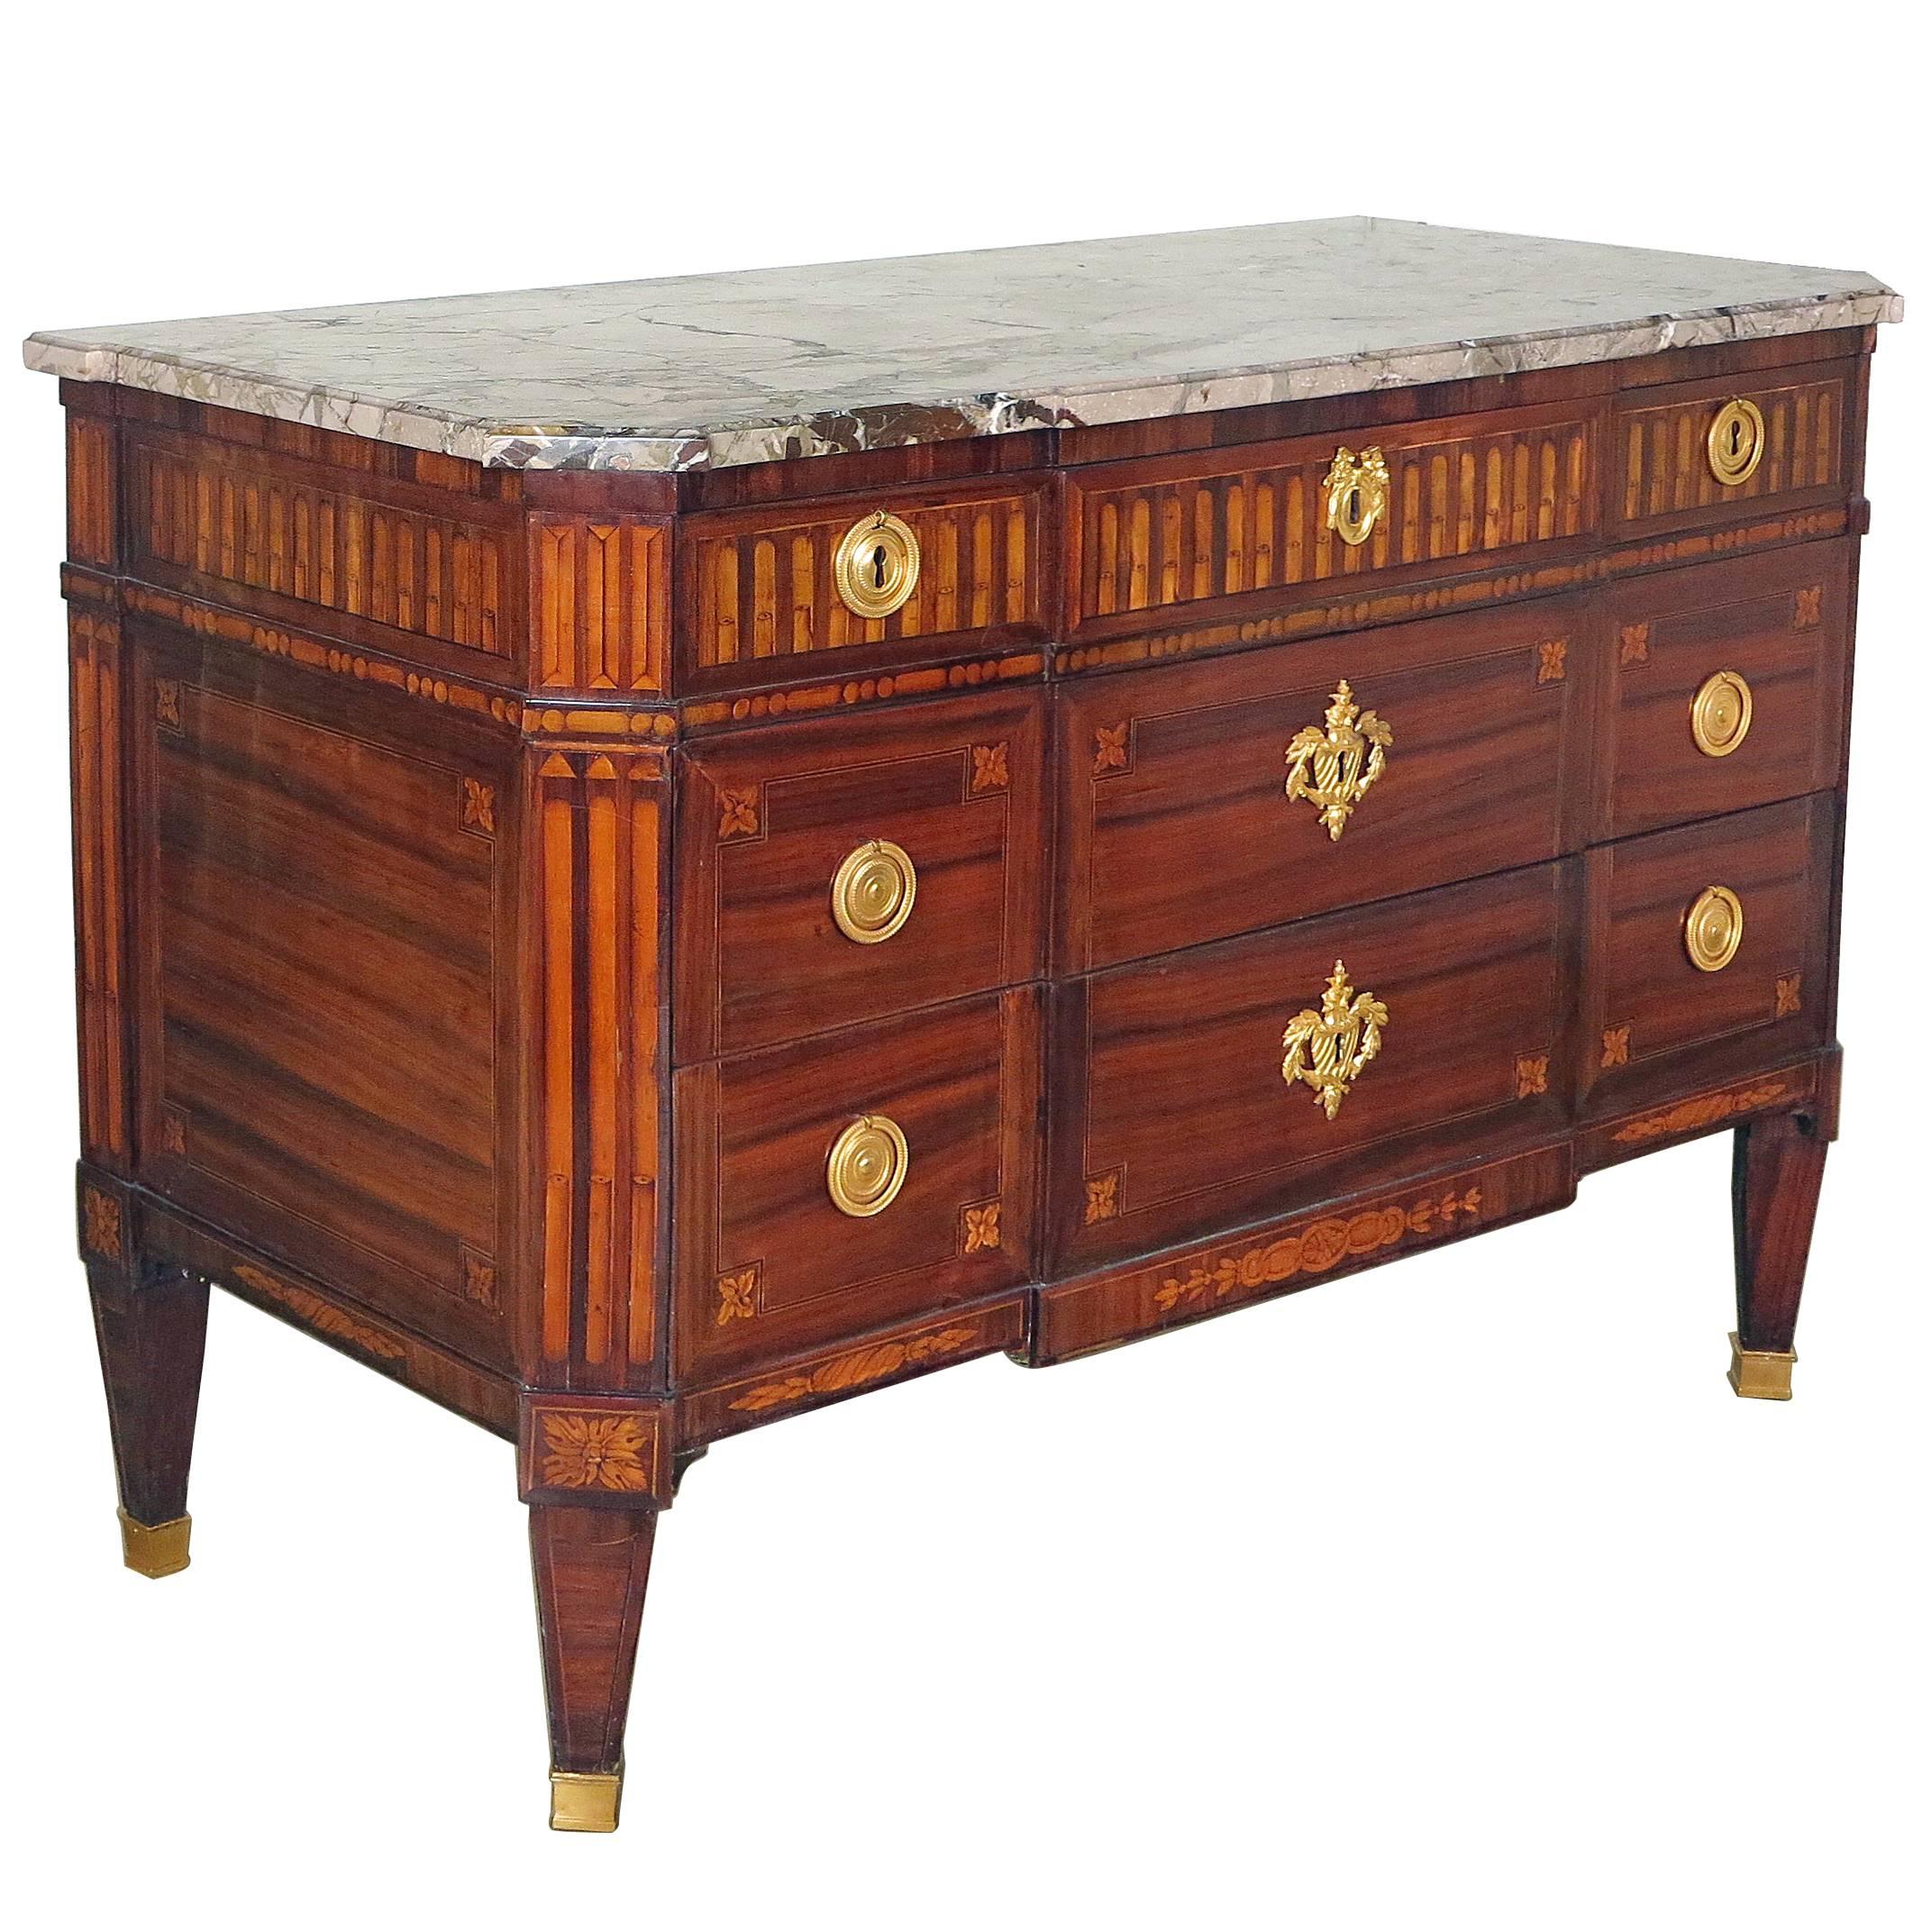 A Fine Louis XVI Kingwood with Tulipwood & Purplewood Inlaid Commode by Crepi For Sale